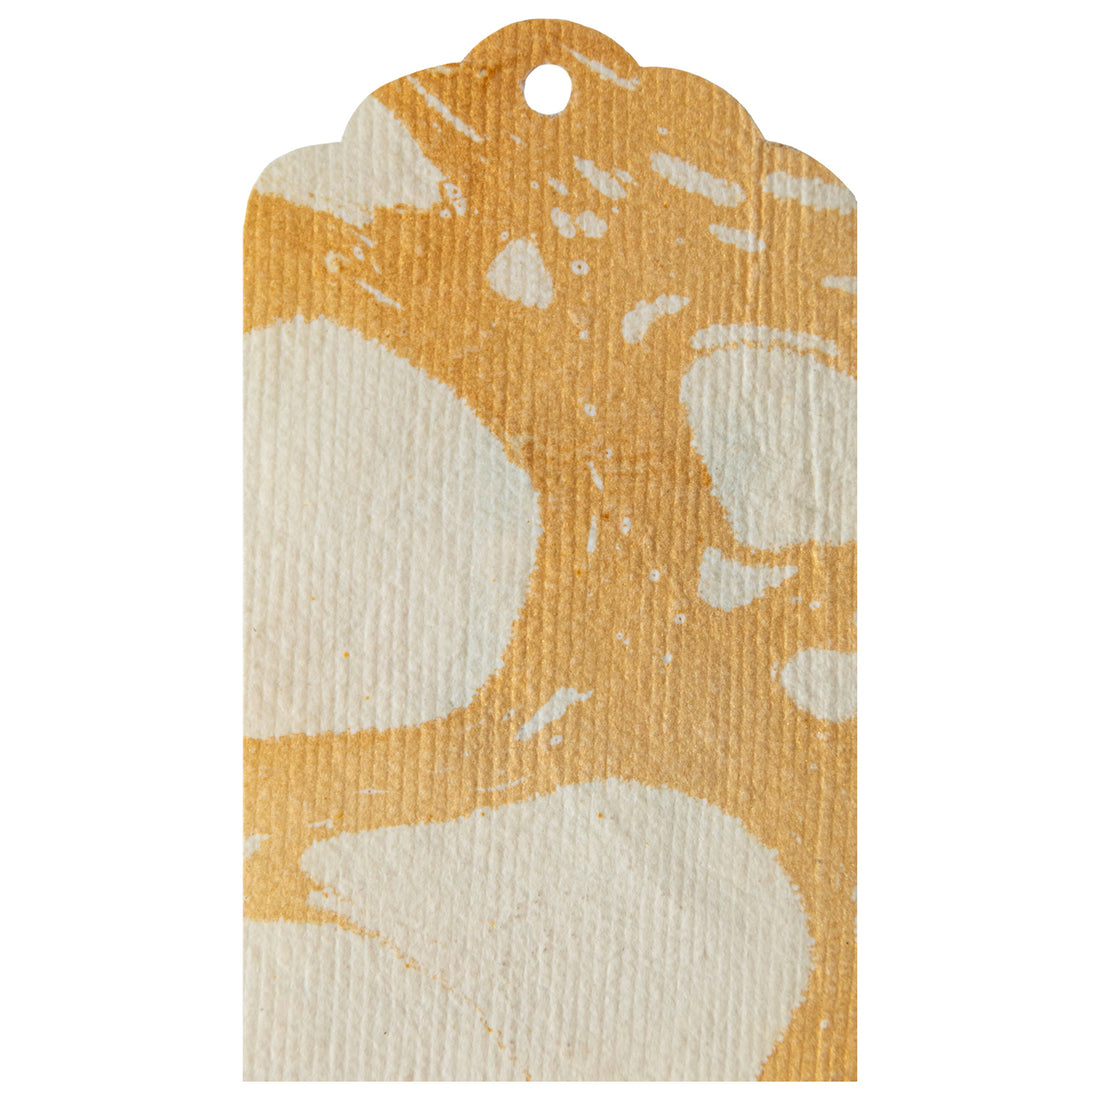 A unique Stone Marbled Gift Tags by Hester &amp; Cook on a white background.